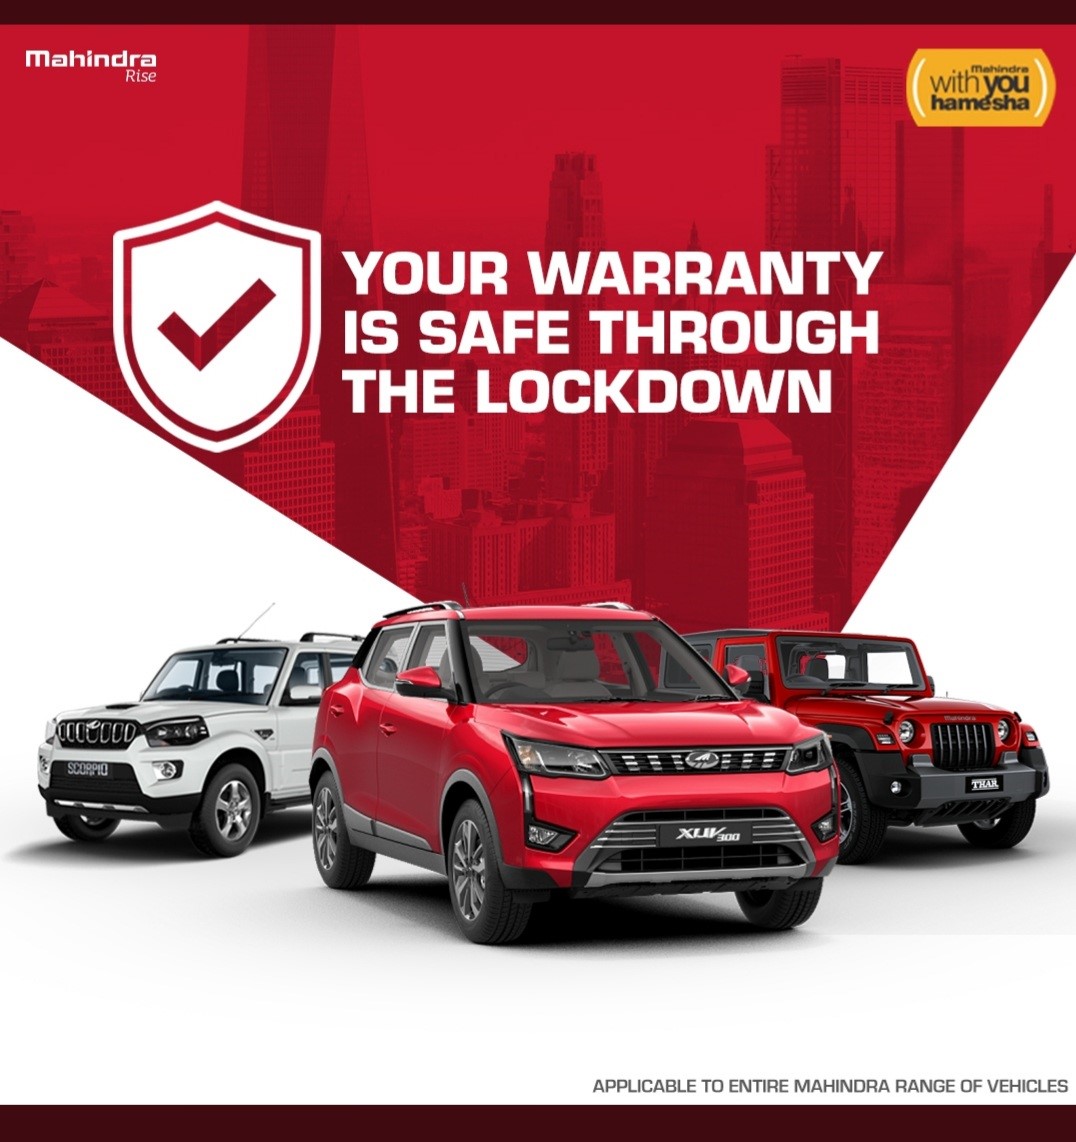 Mahindra extends warranty and free service period on its entire range of vehicles by 3 months